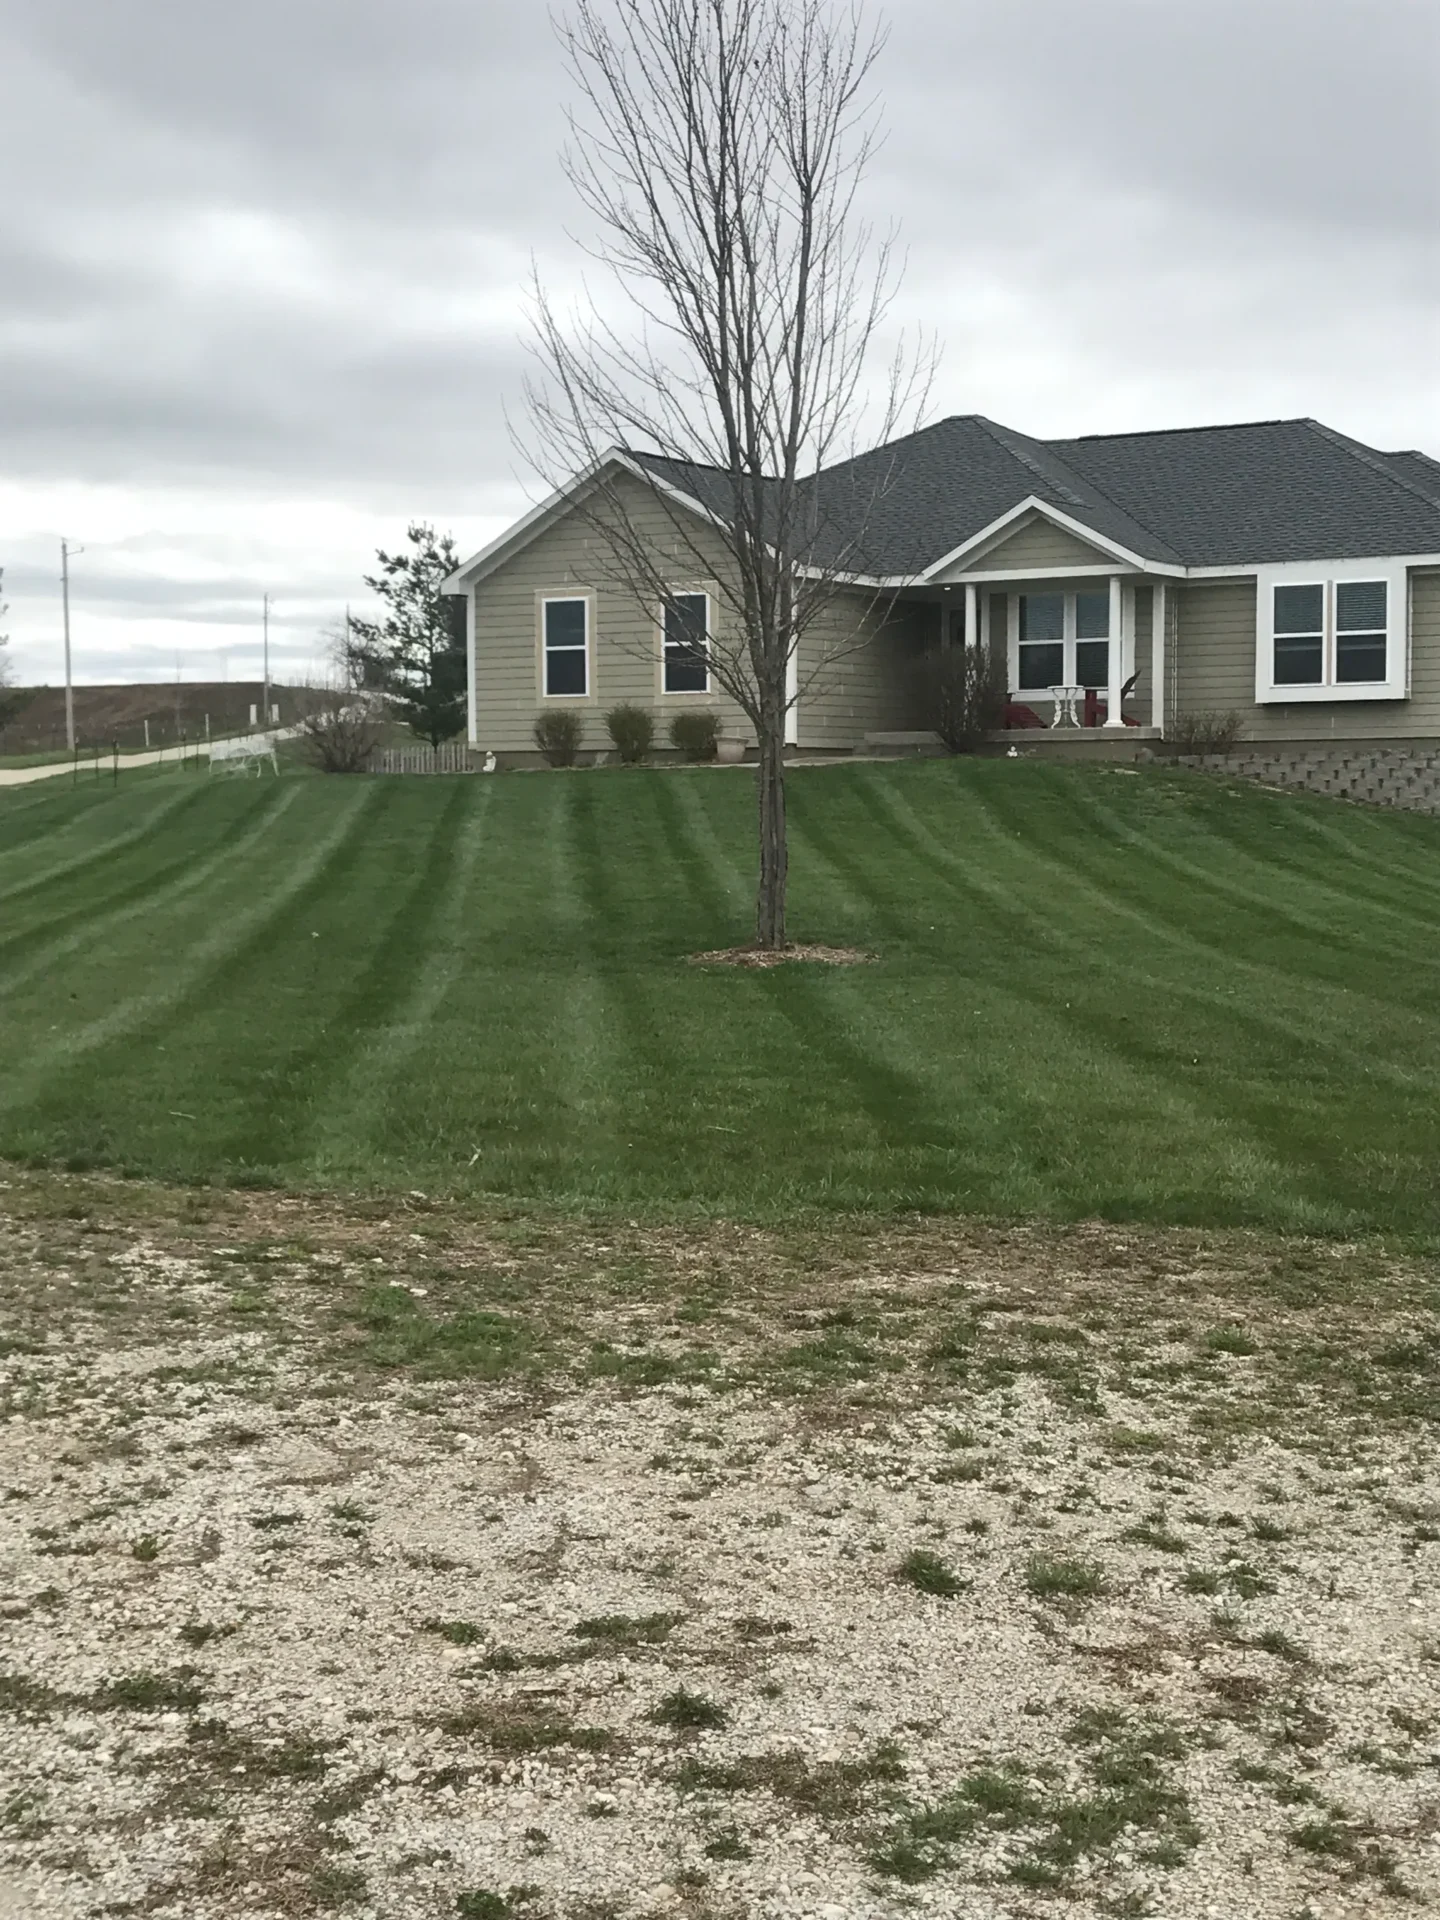 A house with grass growing on the front lawn.